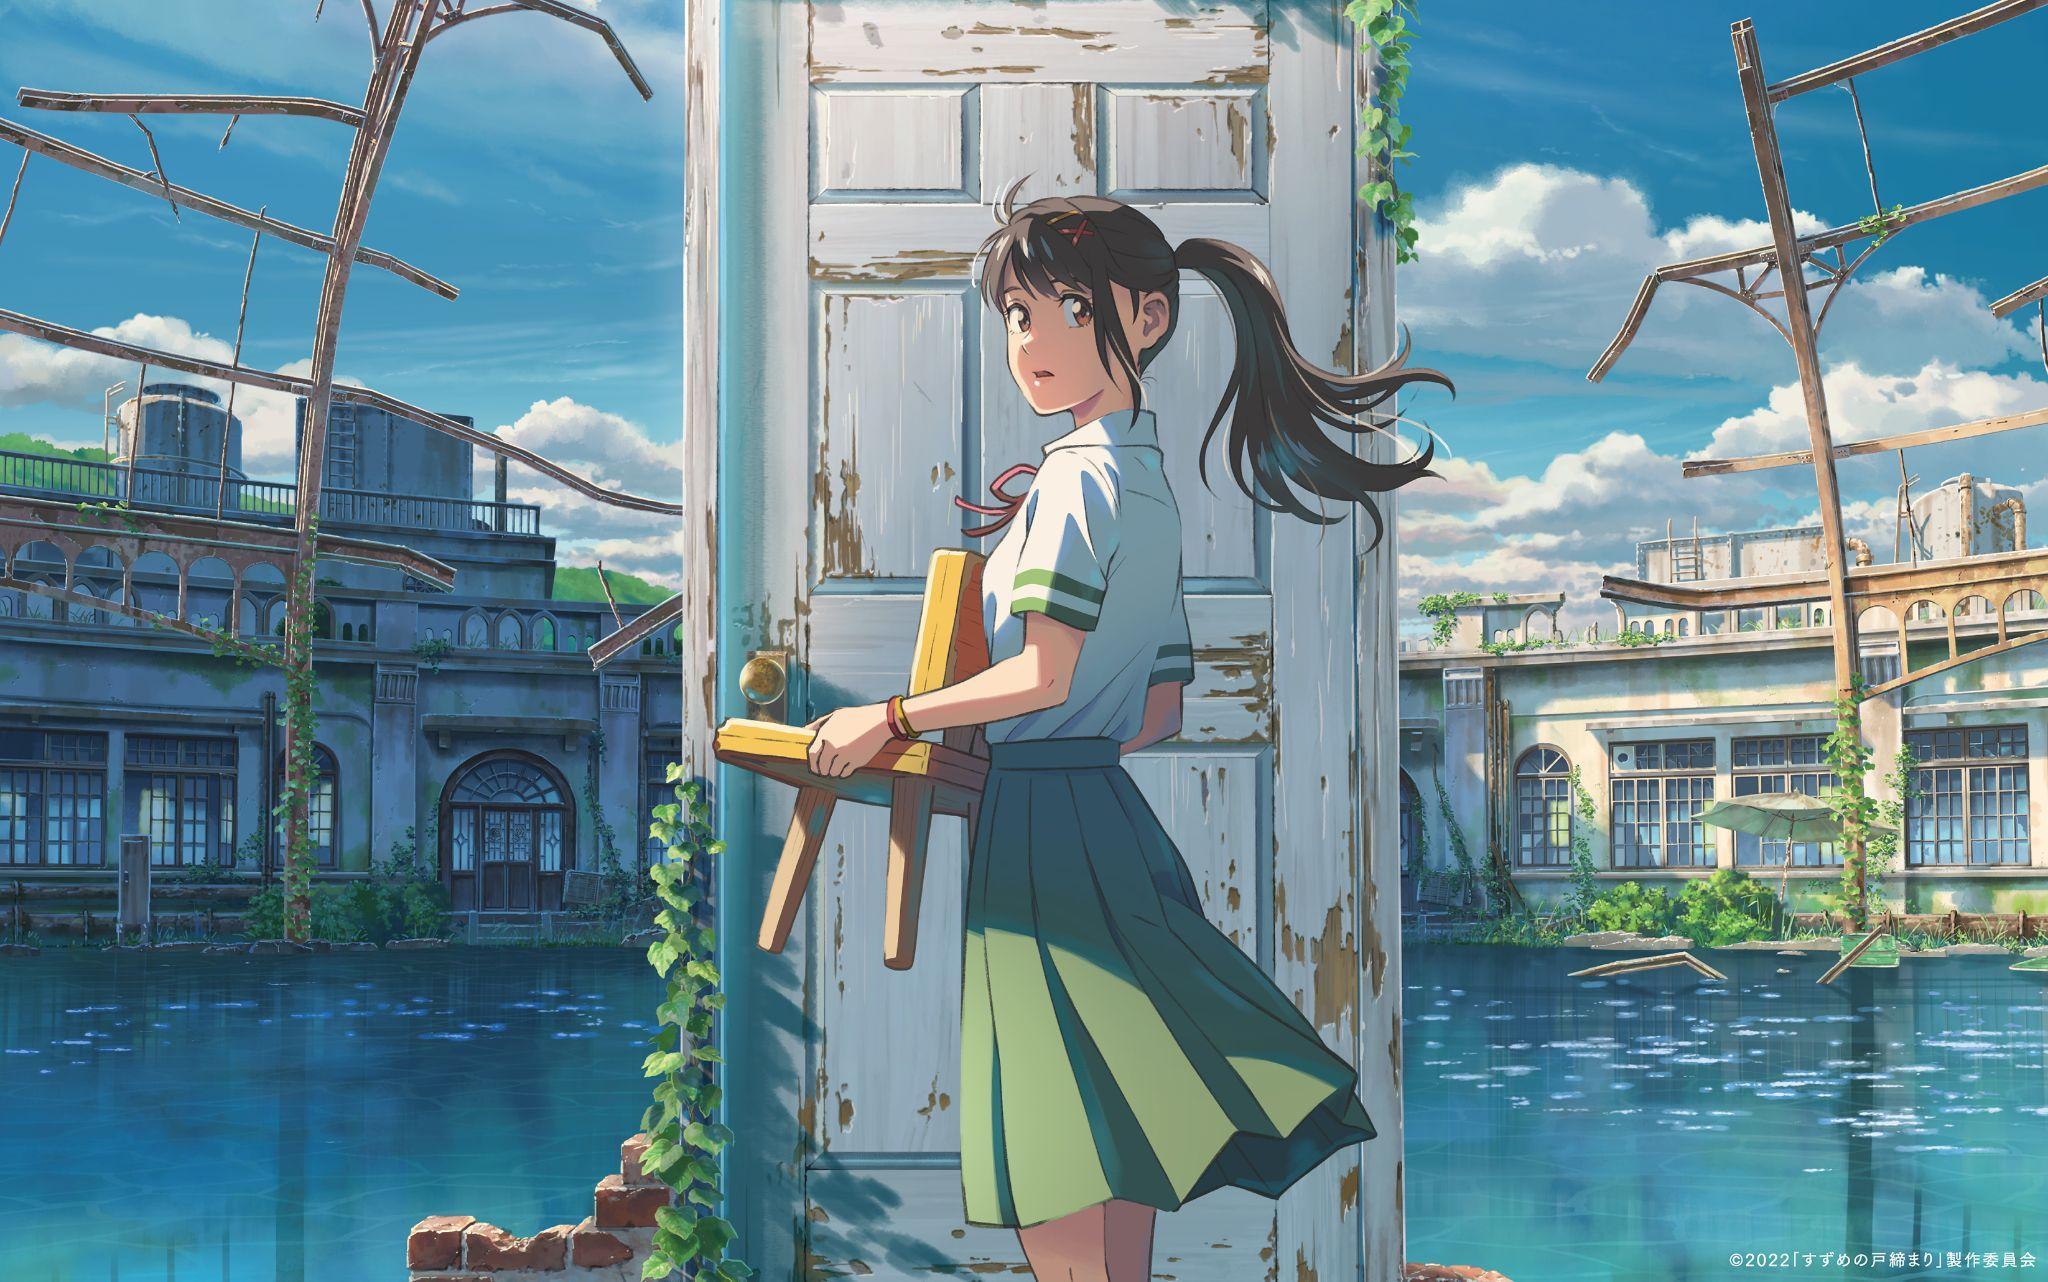 From Your Name to Suzume: The Latest Masterpiece from Makoto Shinkai